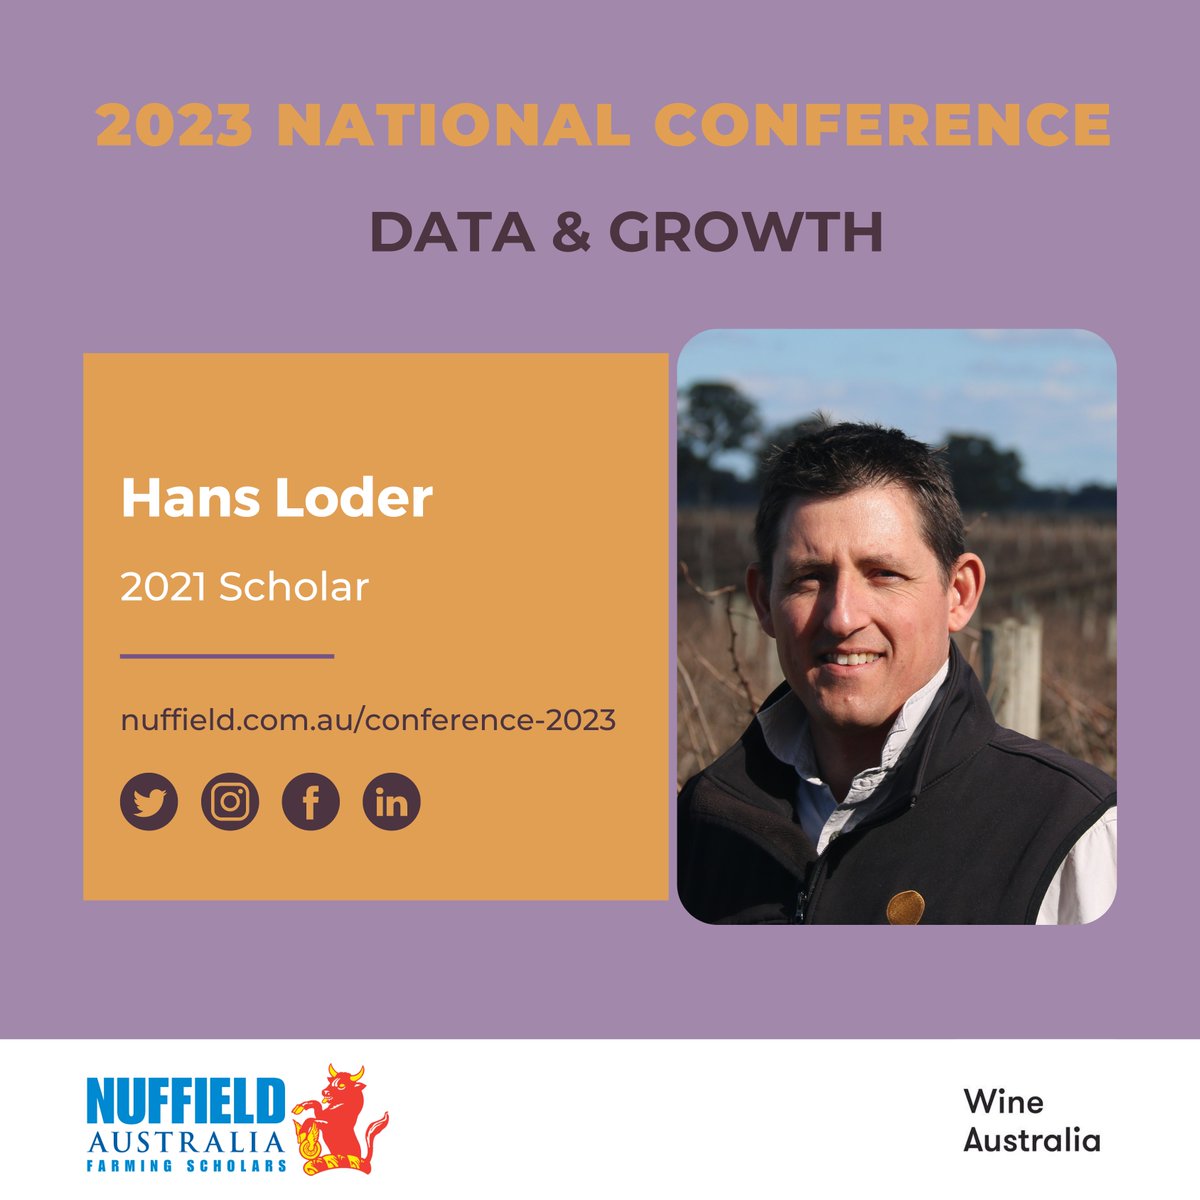 Interested in data and reducing cost of production? Attend our conference and hear SA Scholar Hans Loder present research into data collection and management in #viticulture nuffield.com.au/conference-2023 Han's scholarship is supported by @wine_australia #nuffieldag #ausag #aussieag